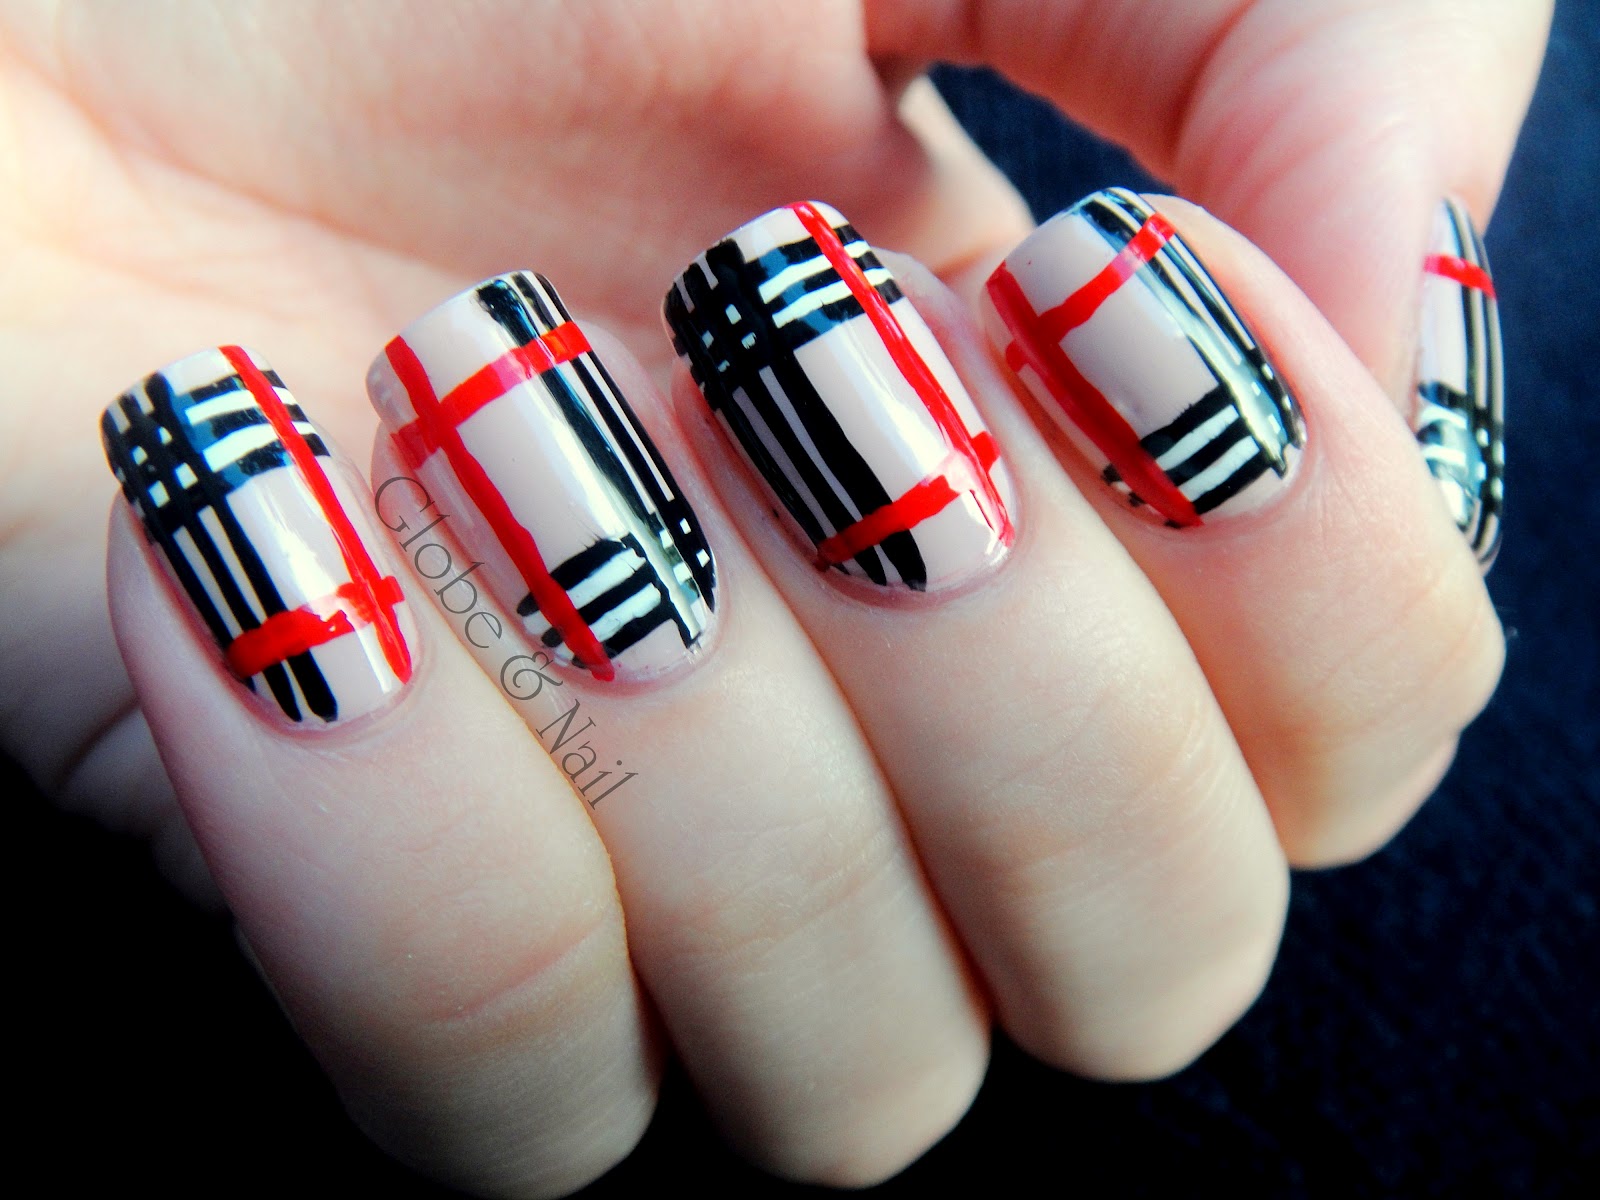 8. Burberry Nail Designs - wide 4